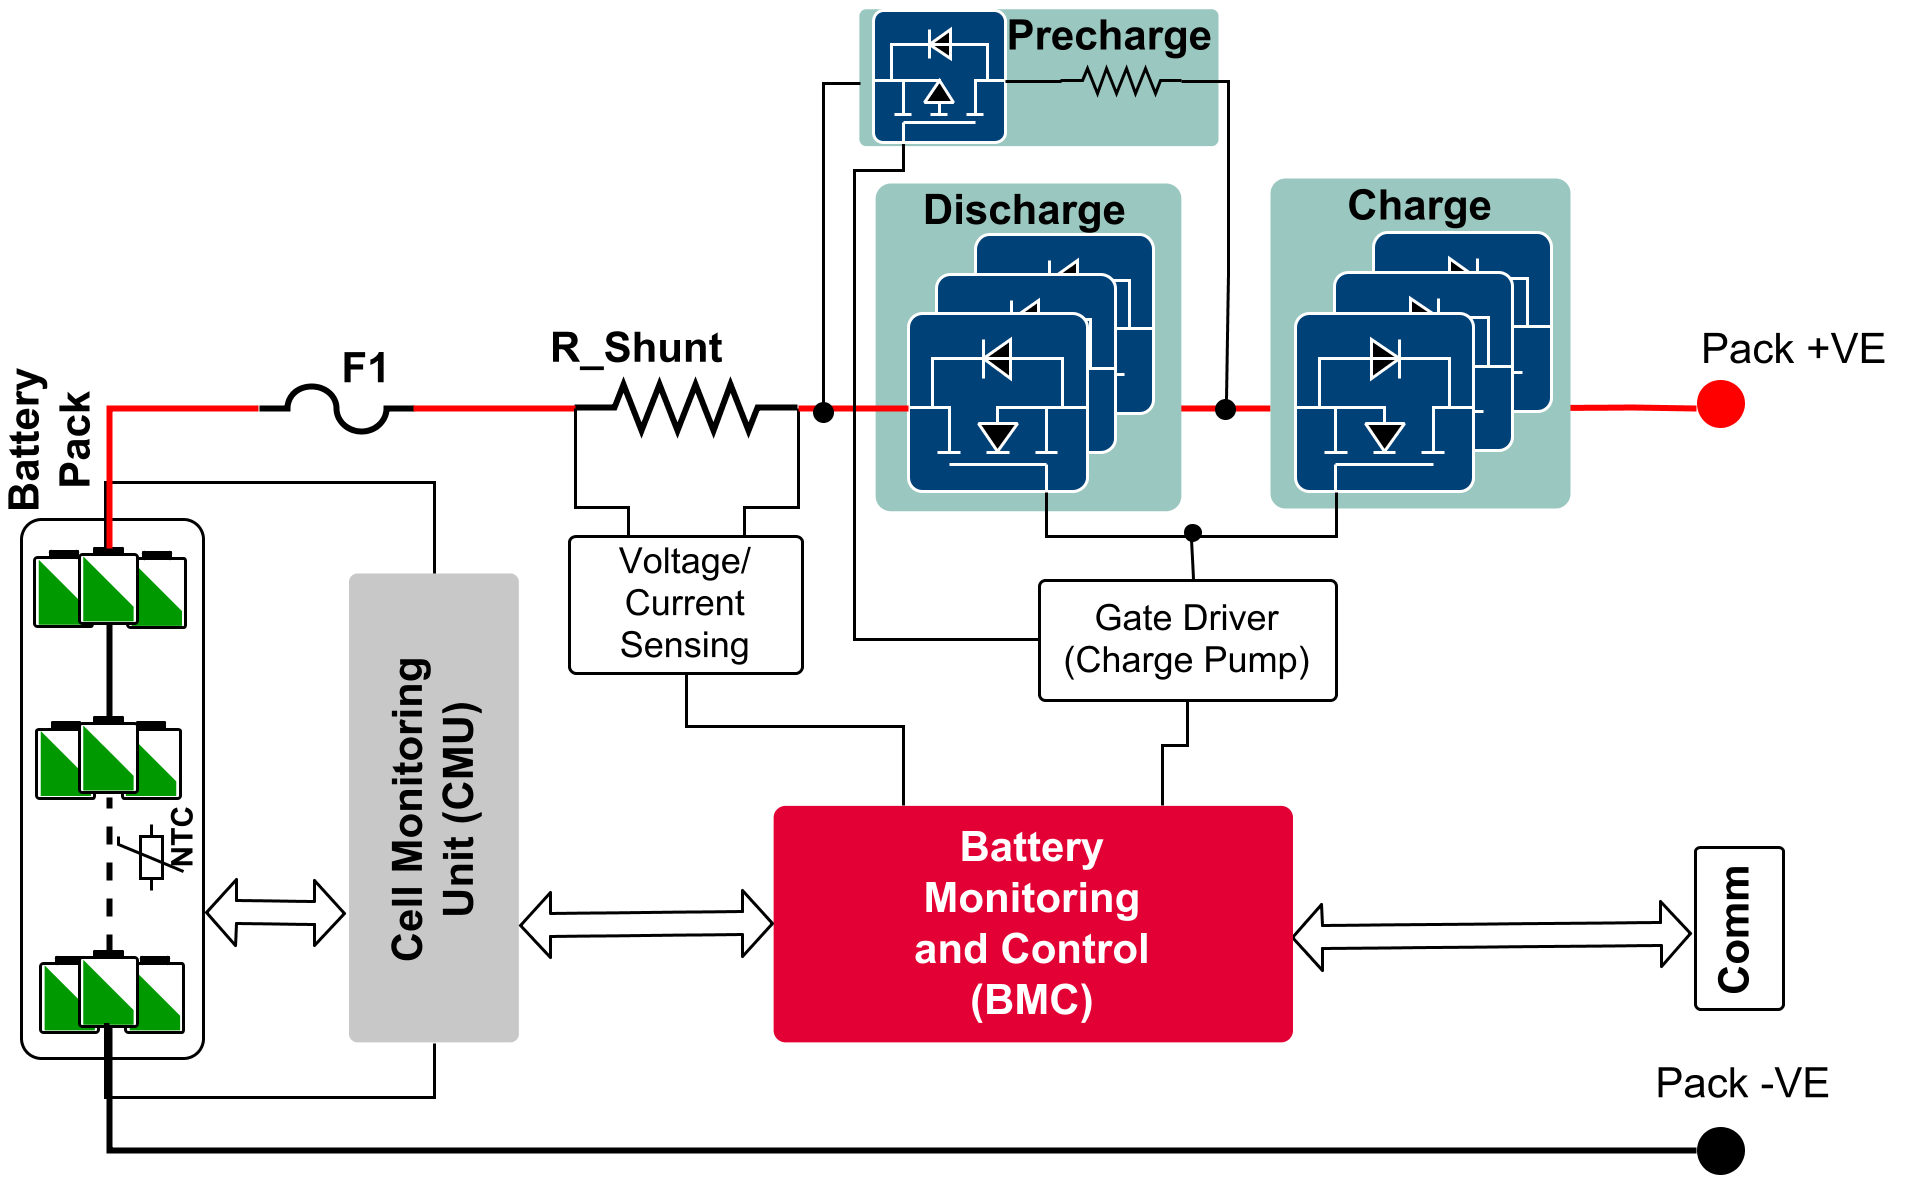 https://www.infineon.com/cms/_images/application/solutions/Source-to-Source-Protection-with-Pre-charge-using-P-Ch.PNG